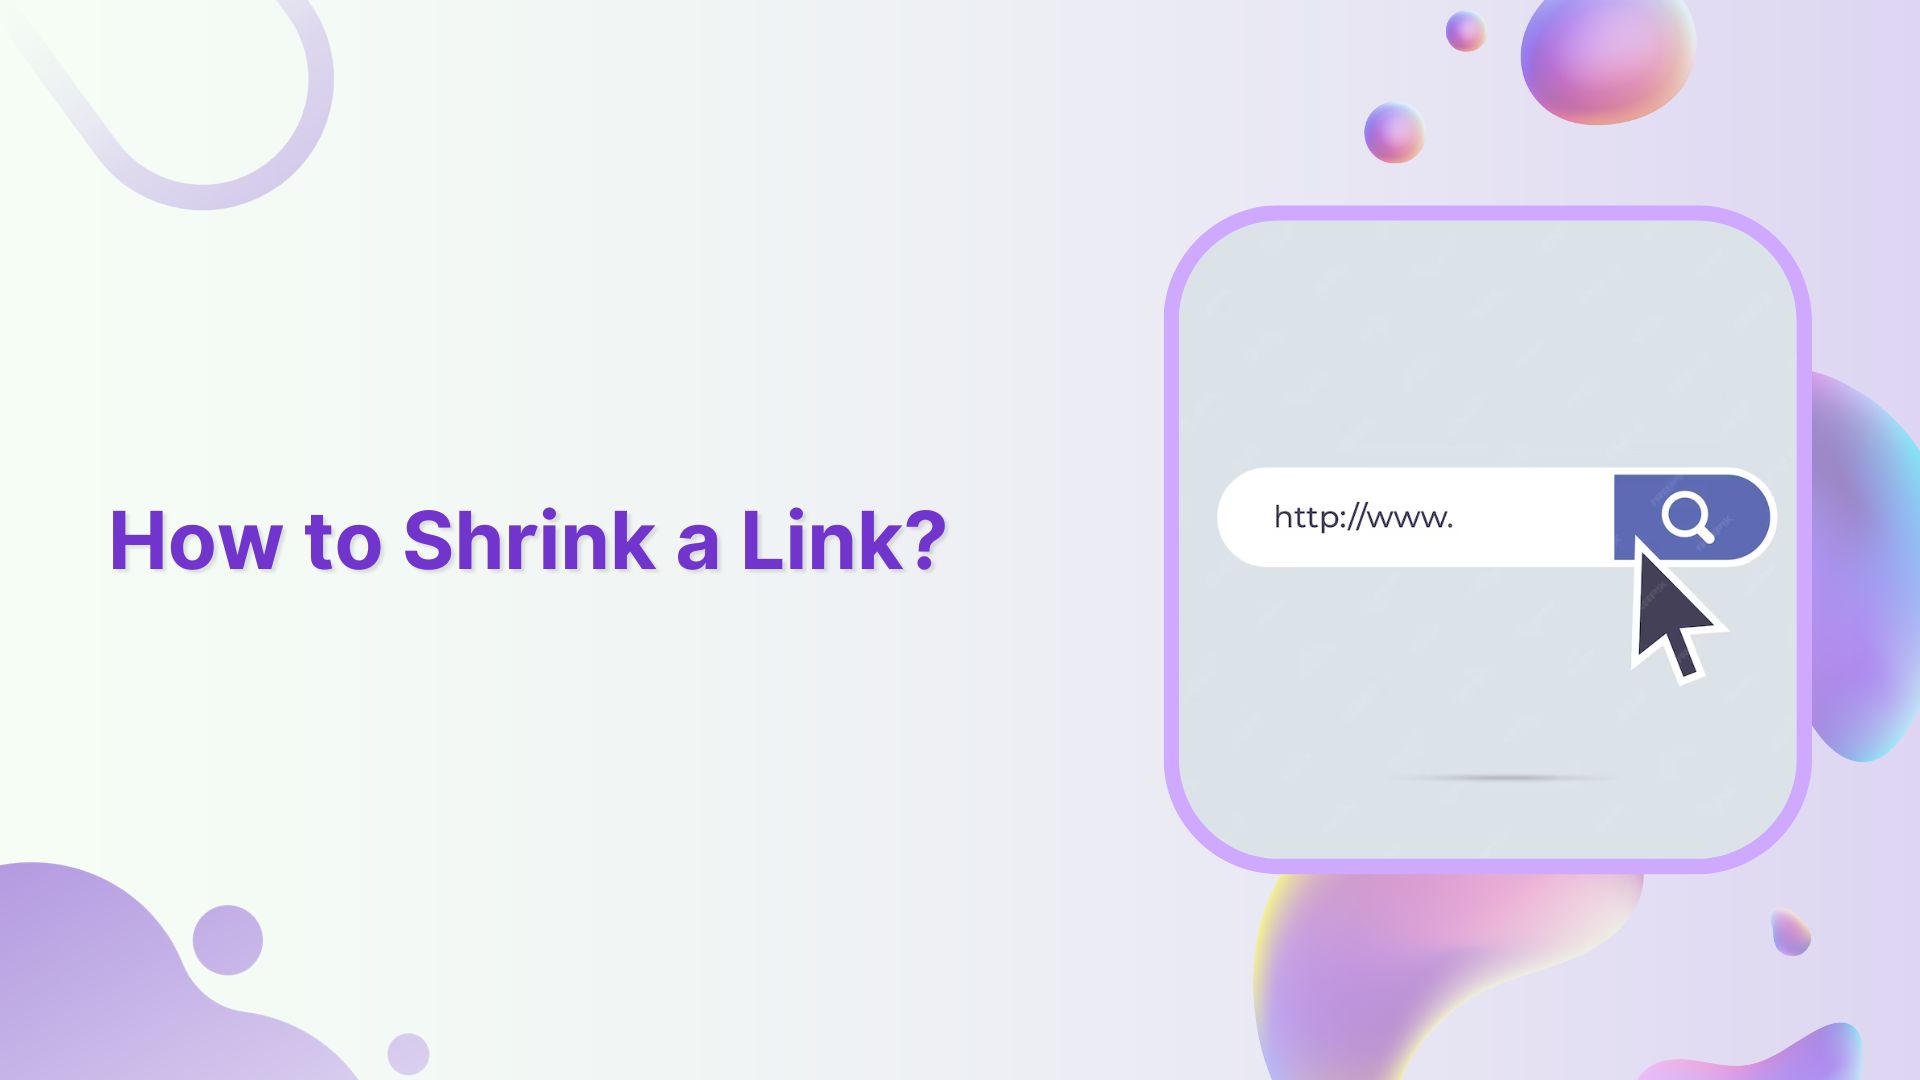 How to Shrink a Link: Step-by-Step Guide